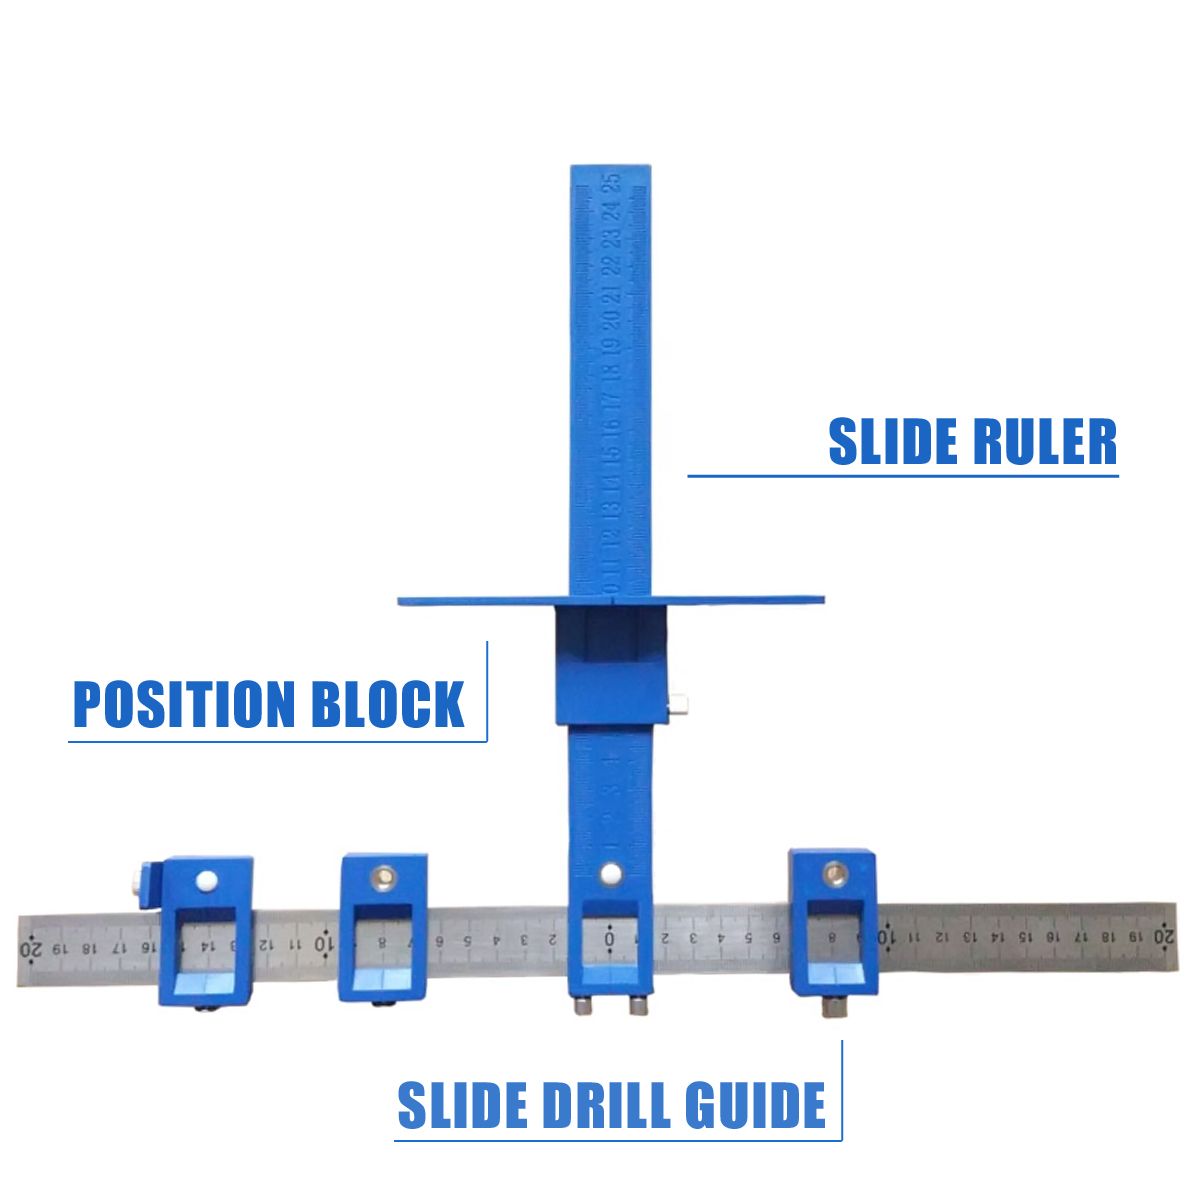 True-Position-Drill-Guide-Cabinet-Hardware-Jig-for-Wooden-Working-Woodworking-Tools-1350058